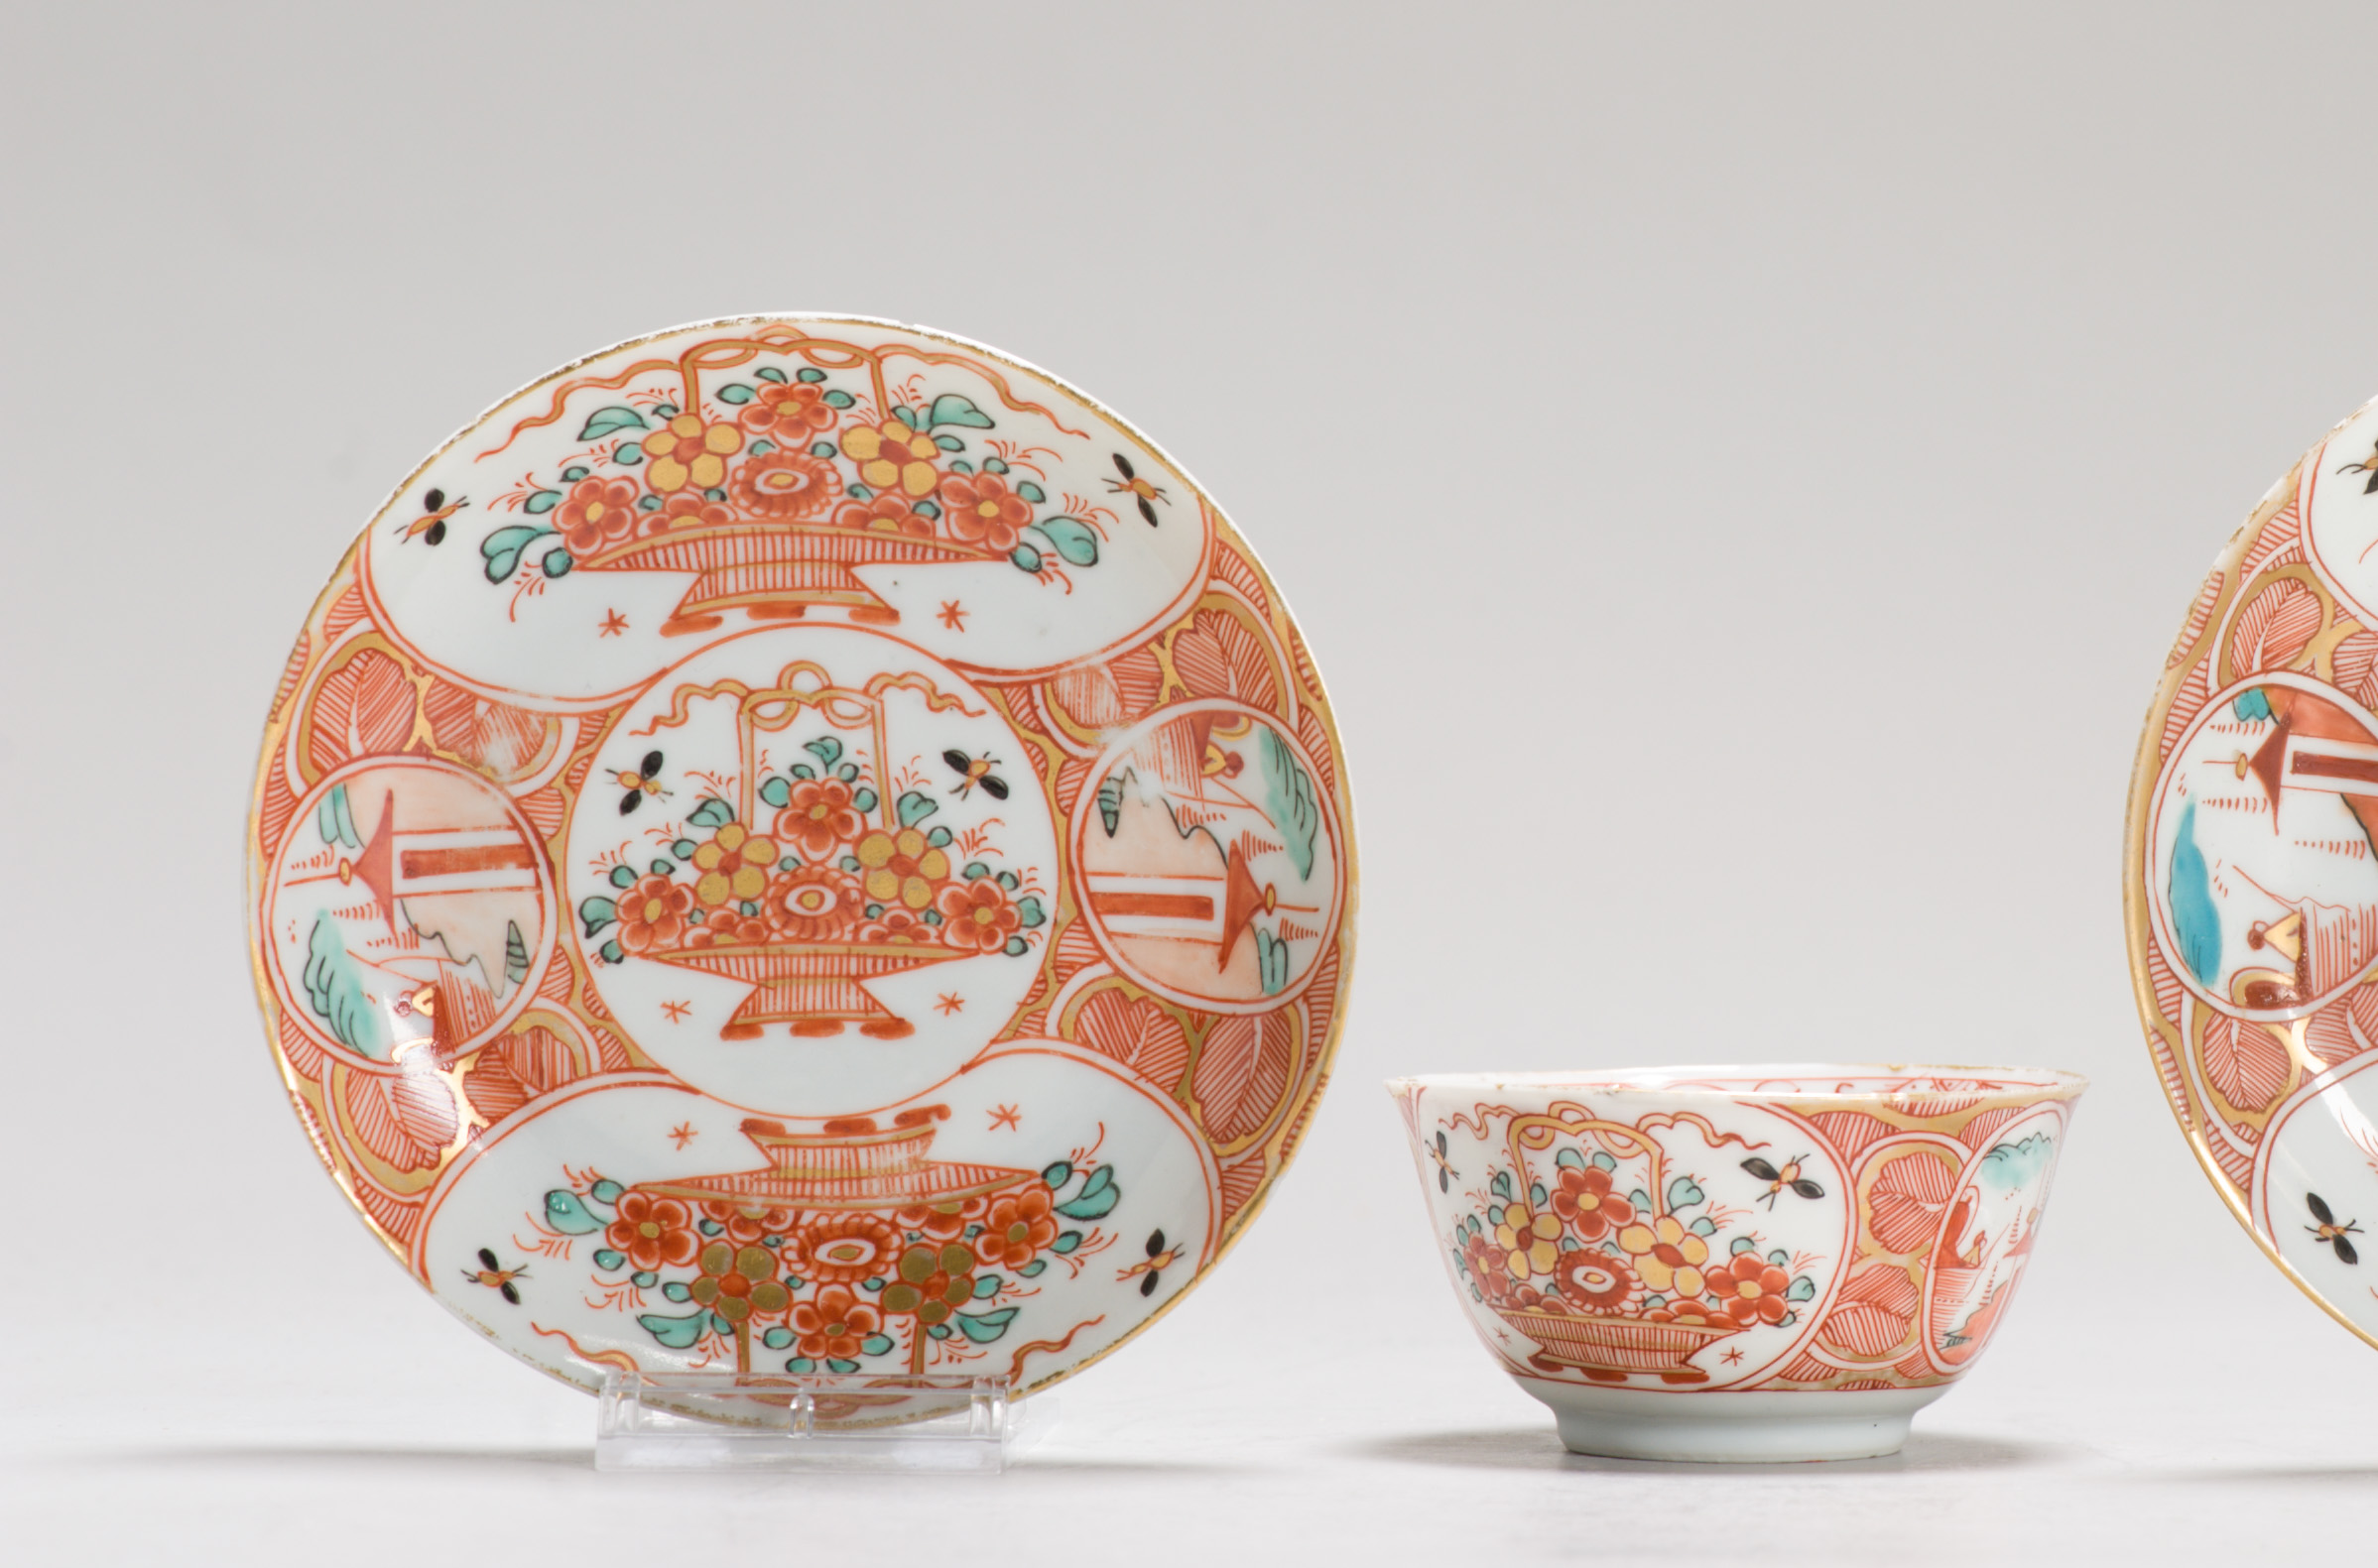 1256 & 1257 A Lovely Pair of Tea Bowl and Saucer. Painted in Europe on a Chinese Blank. Amsterdam Bont